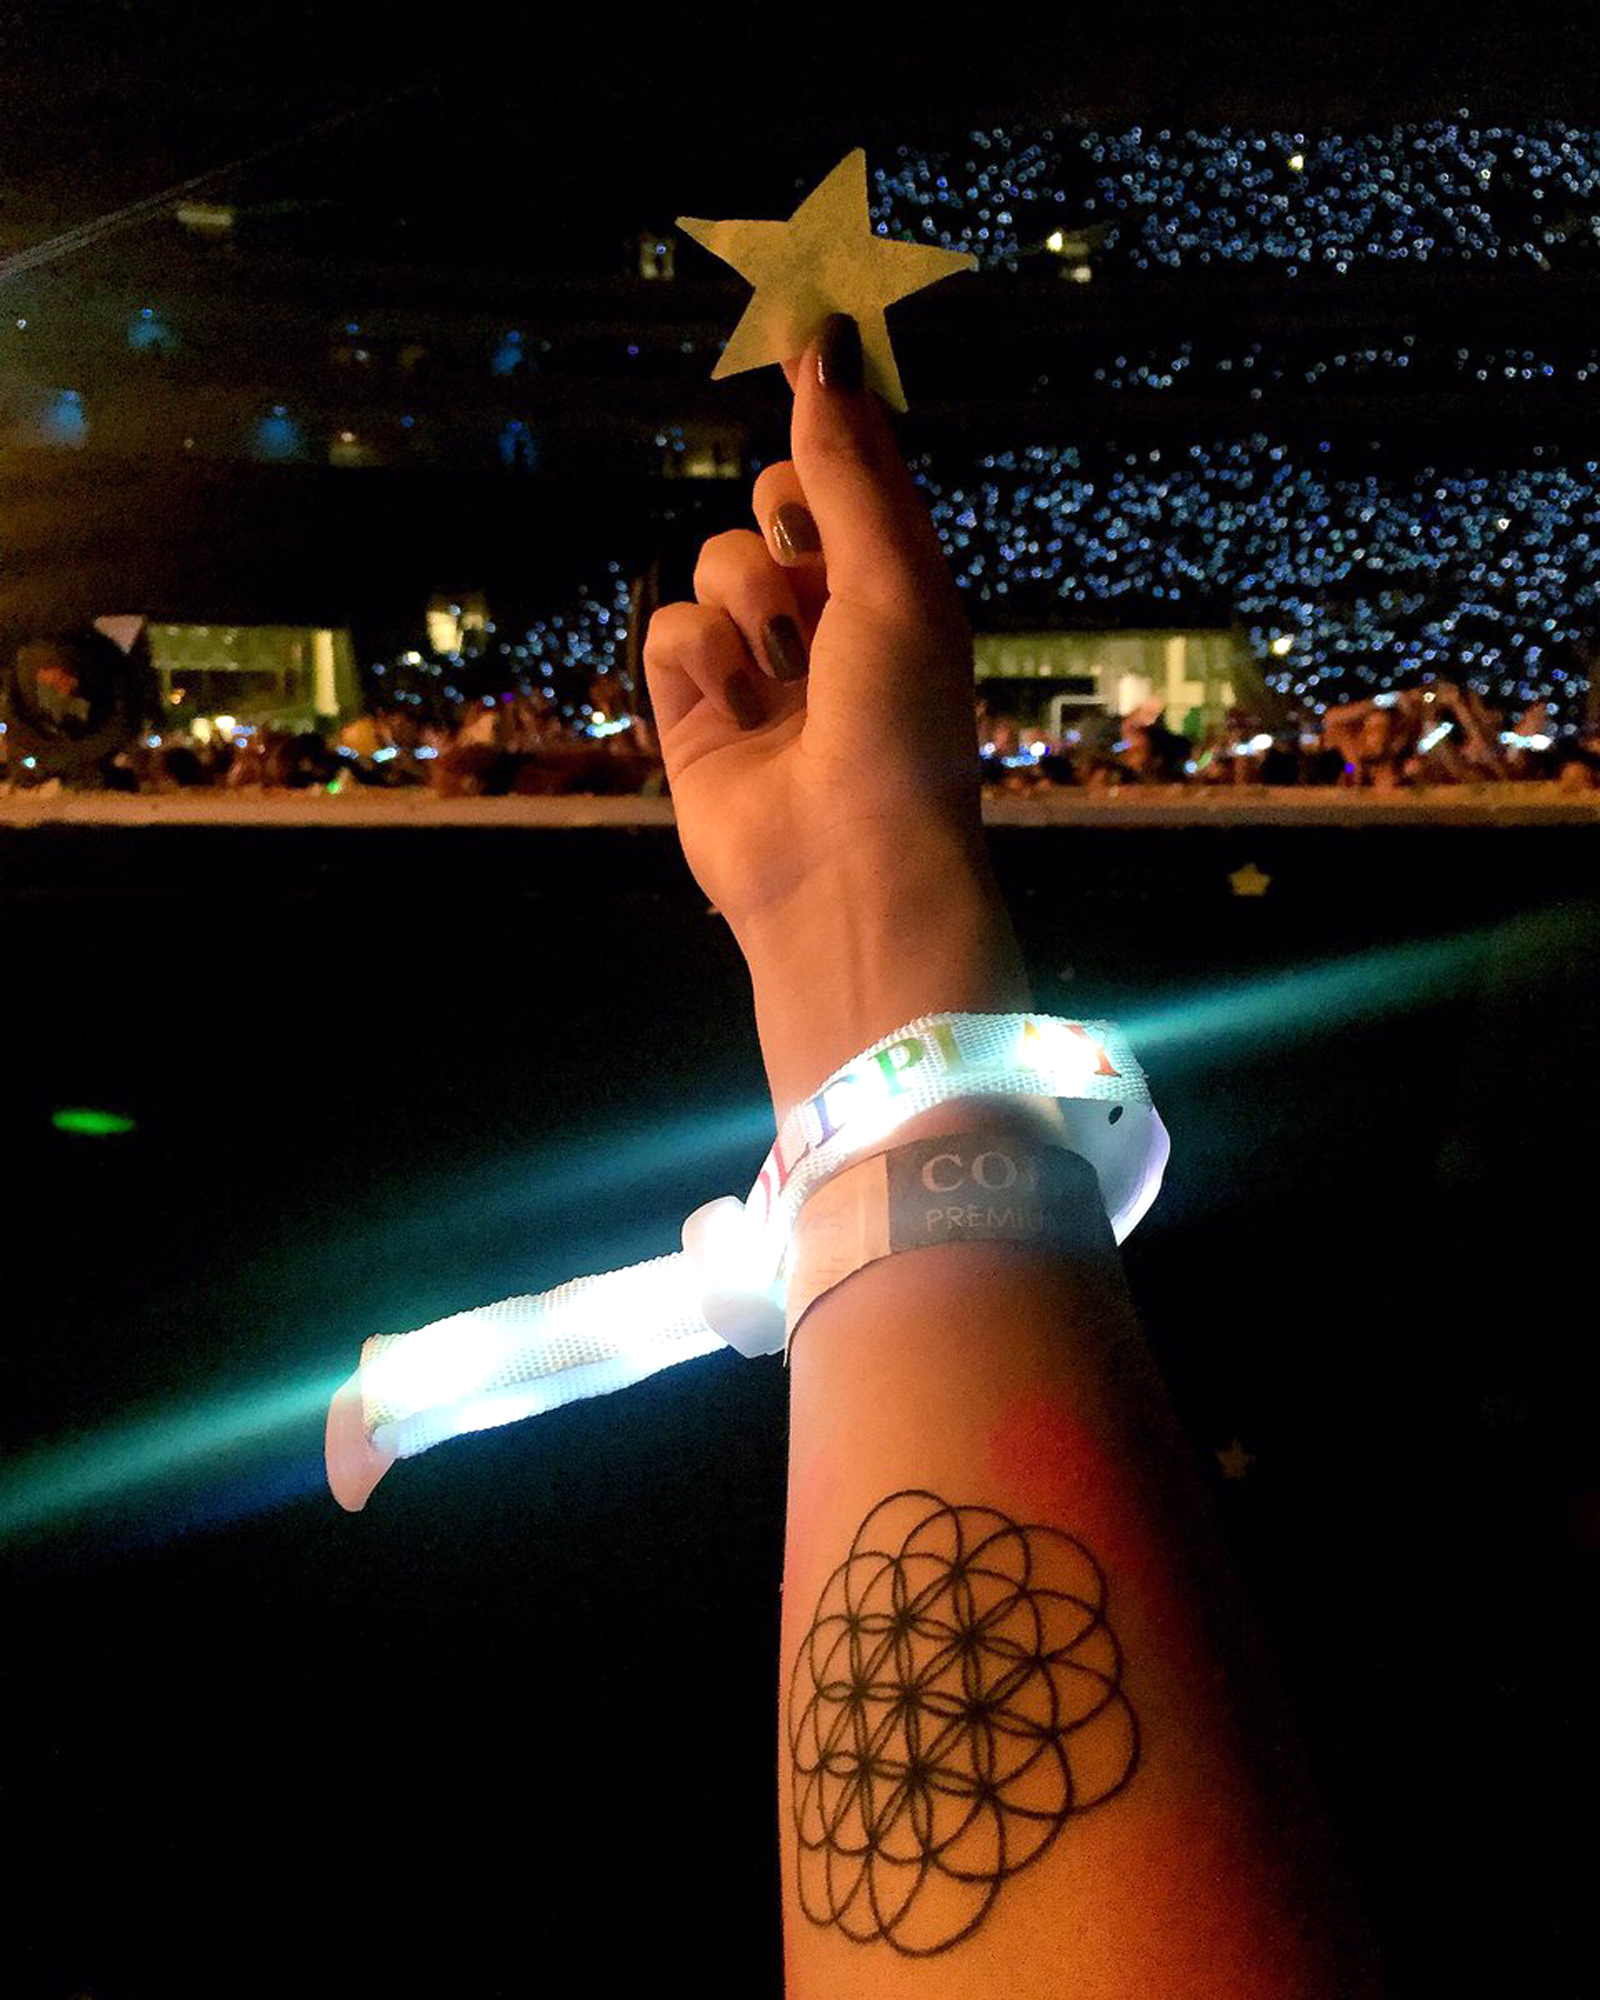 coldplay #xylobands #coldplayfilm #love ❤ | Coldplay concer… | Flickr